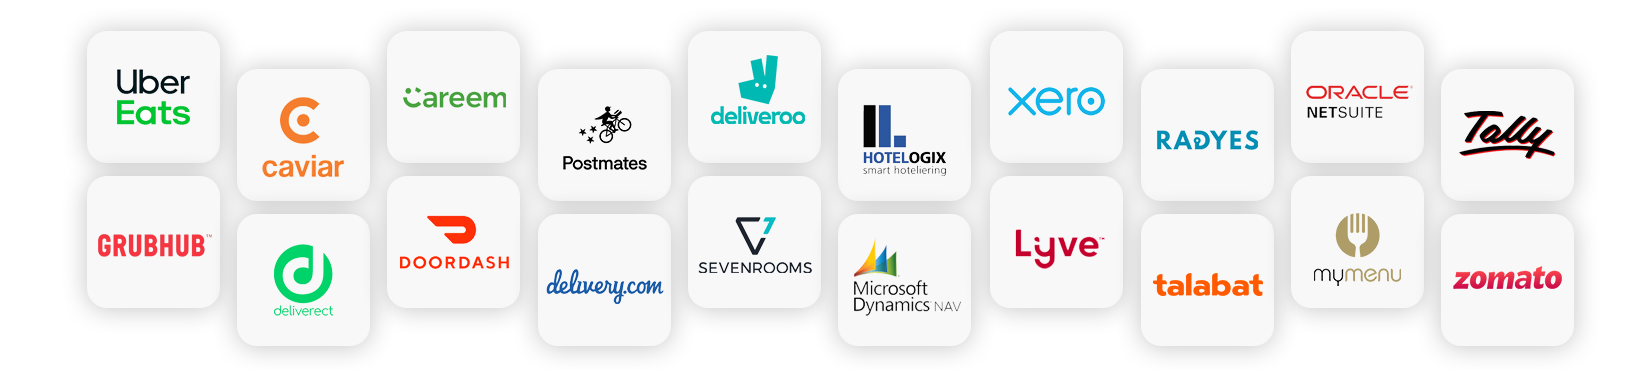 A vector graphic showing various integrations for a fast casual restaurant management software